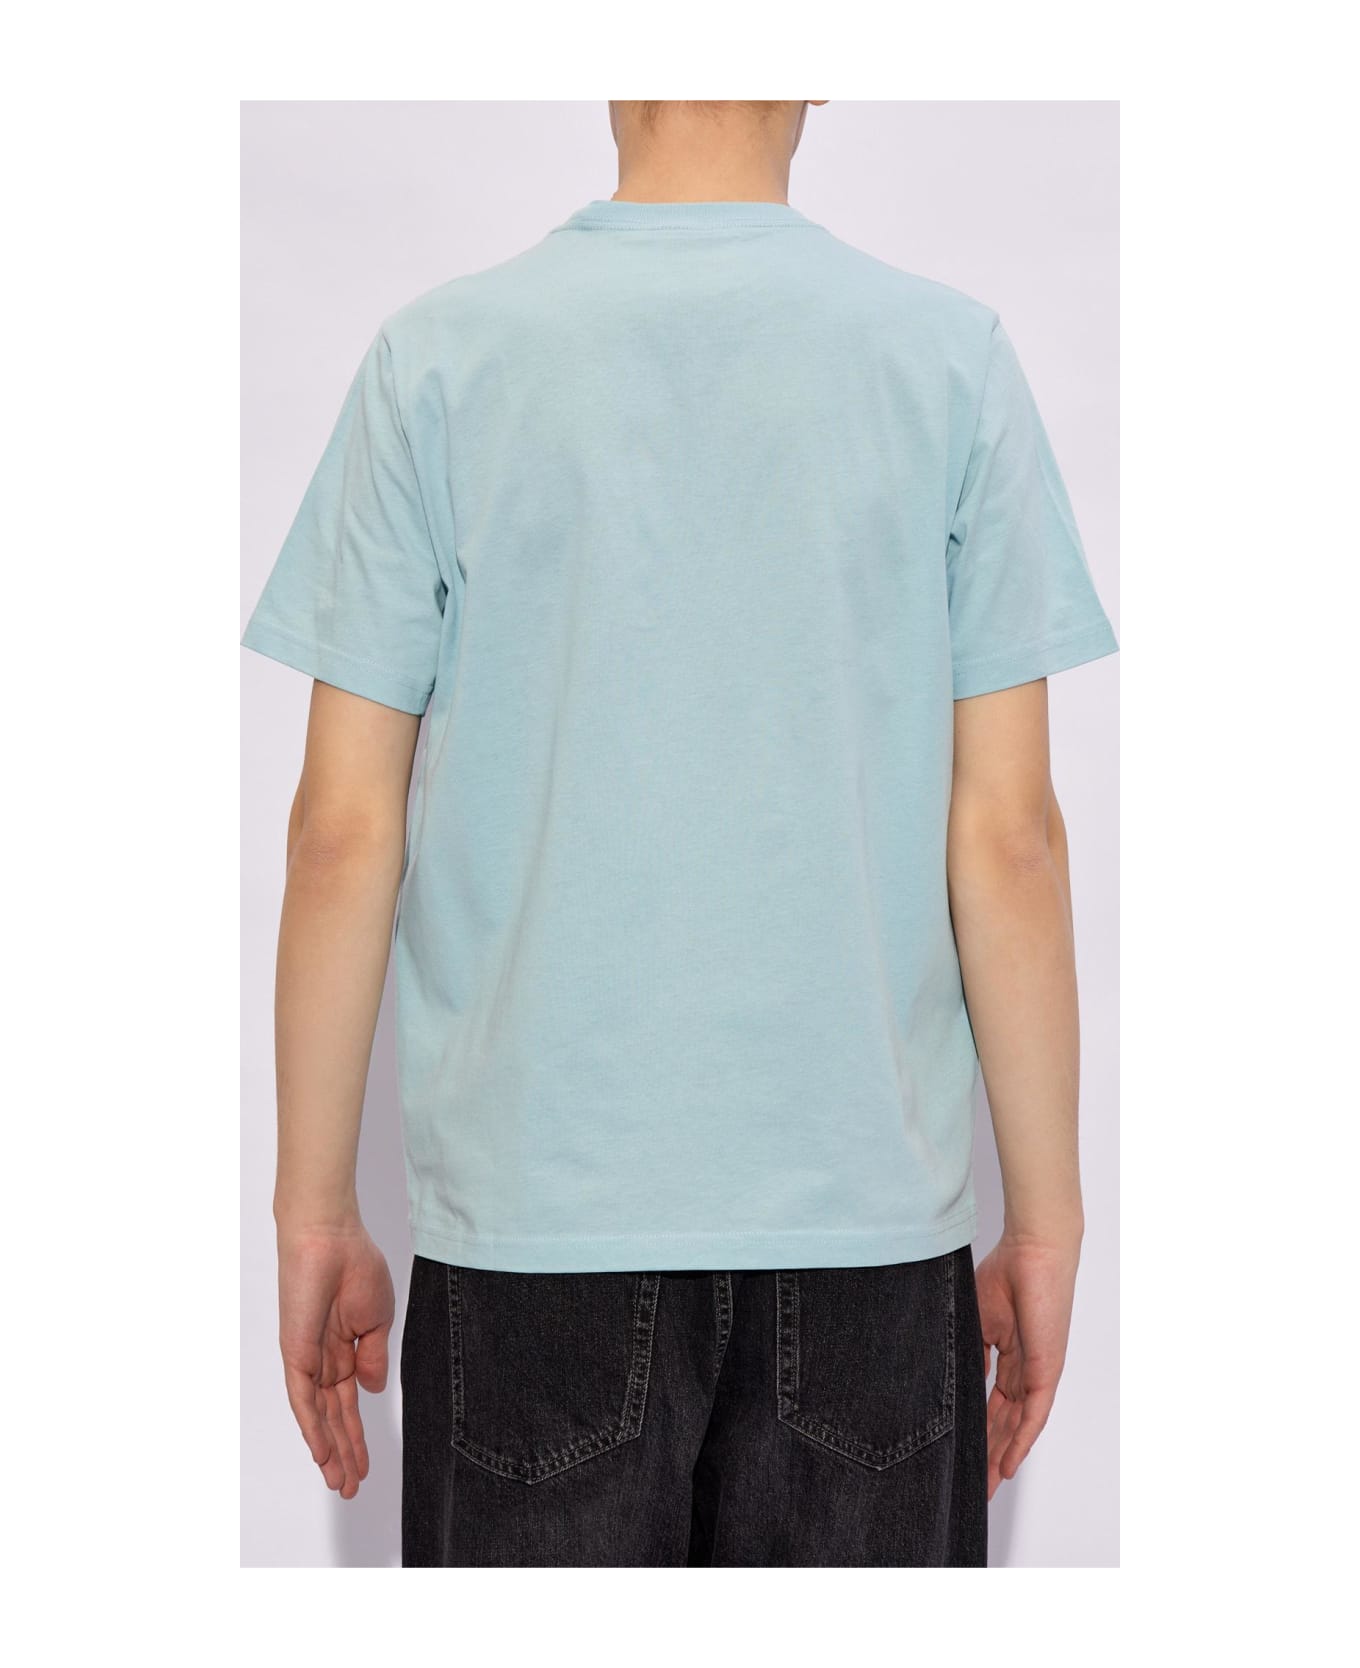 Paul Smith Ps Paul Smith Printed T-shirt - Clear Blue シャツ